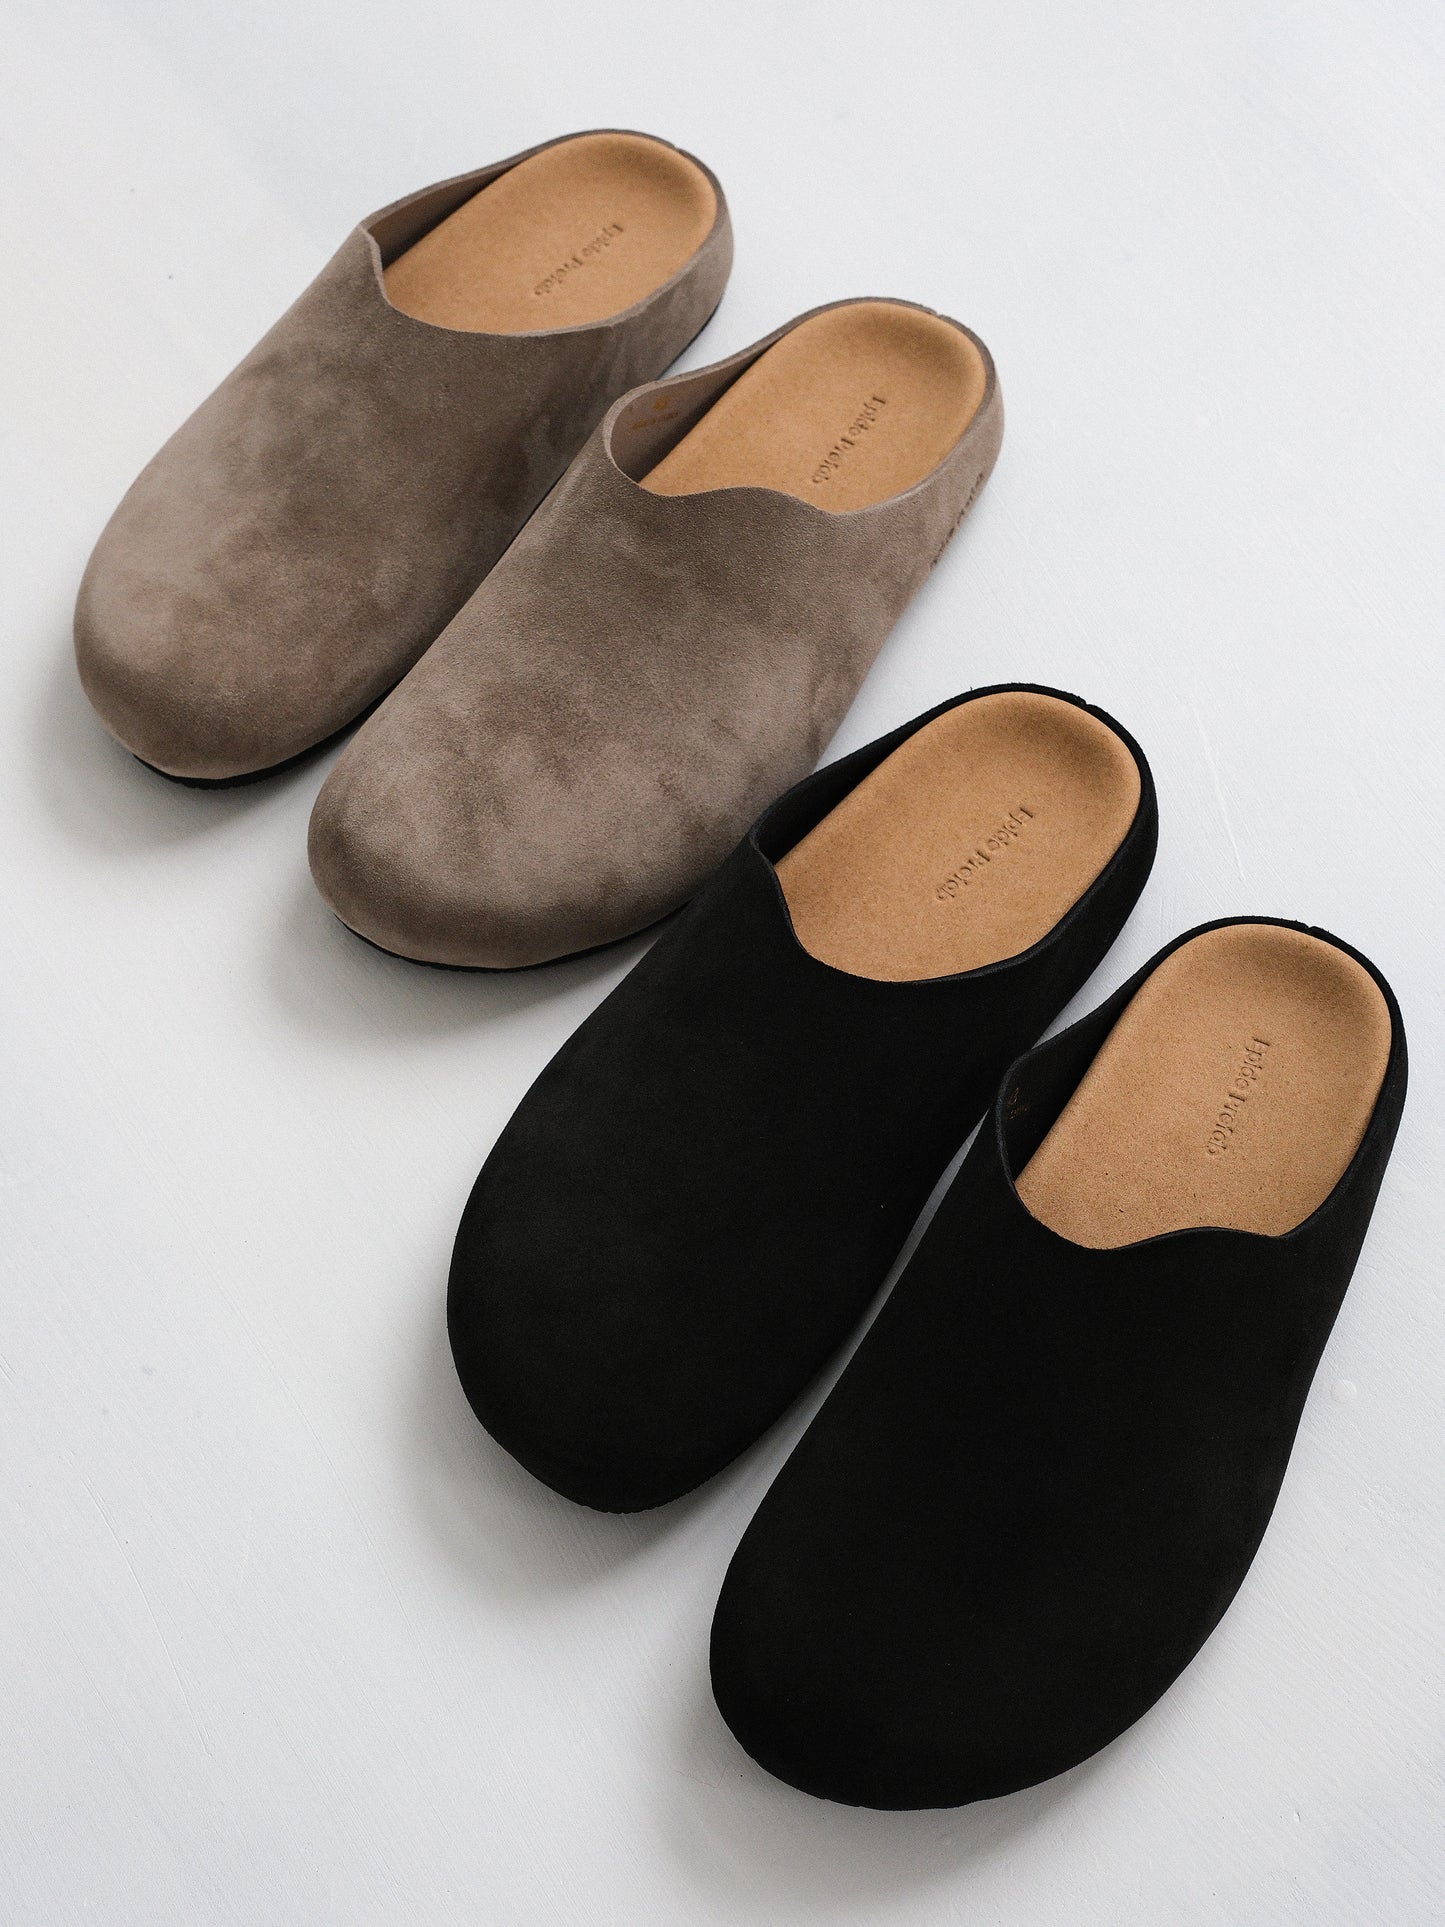 LZC Slide Loafer in Suede